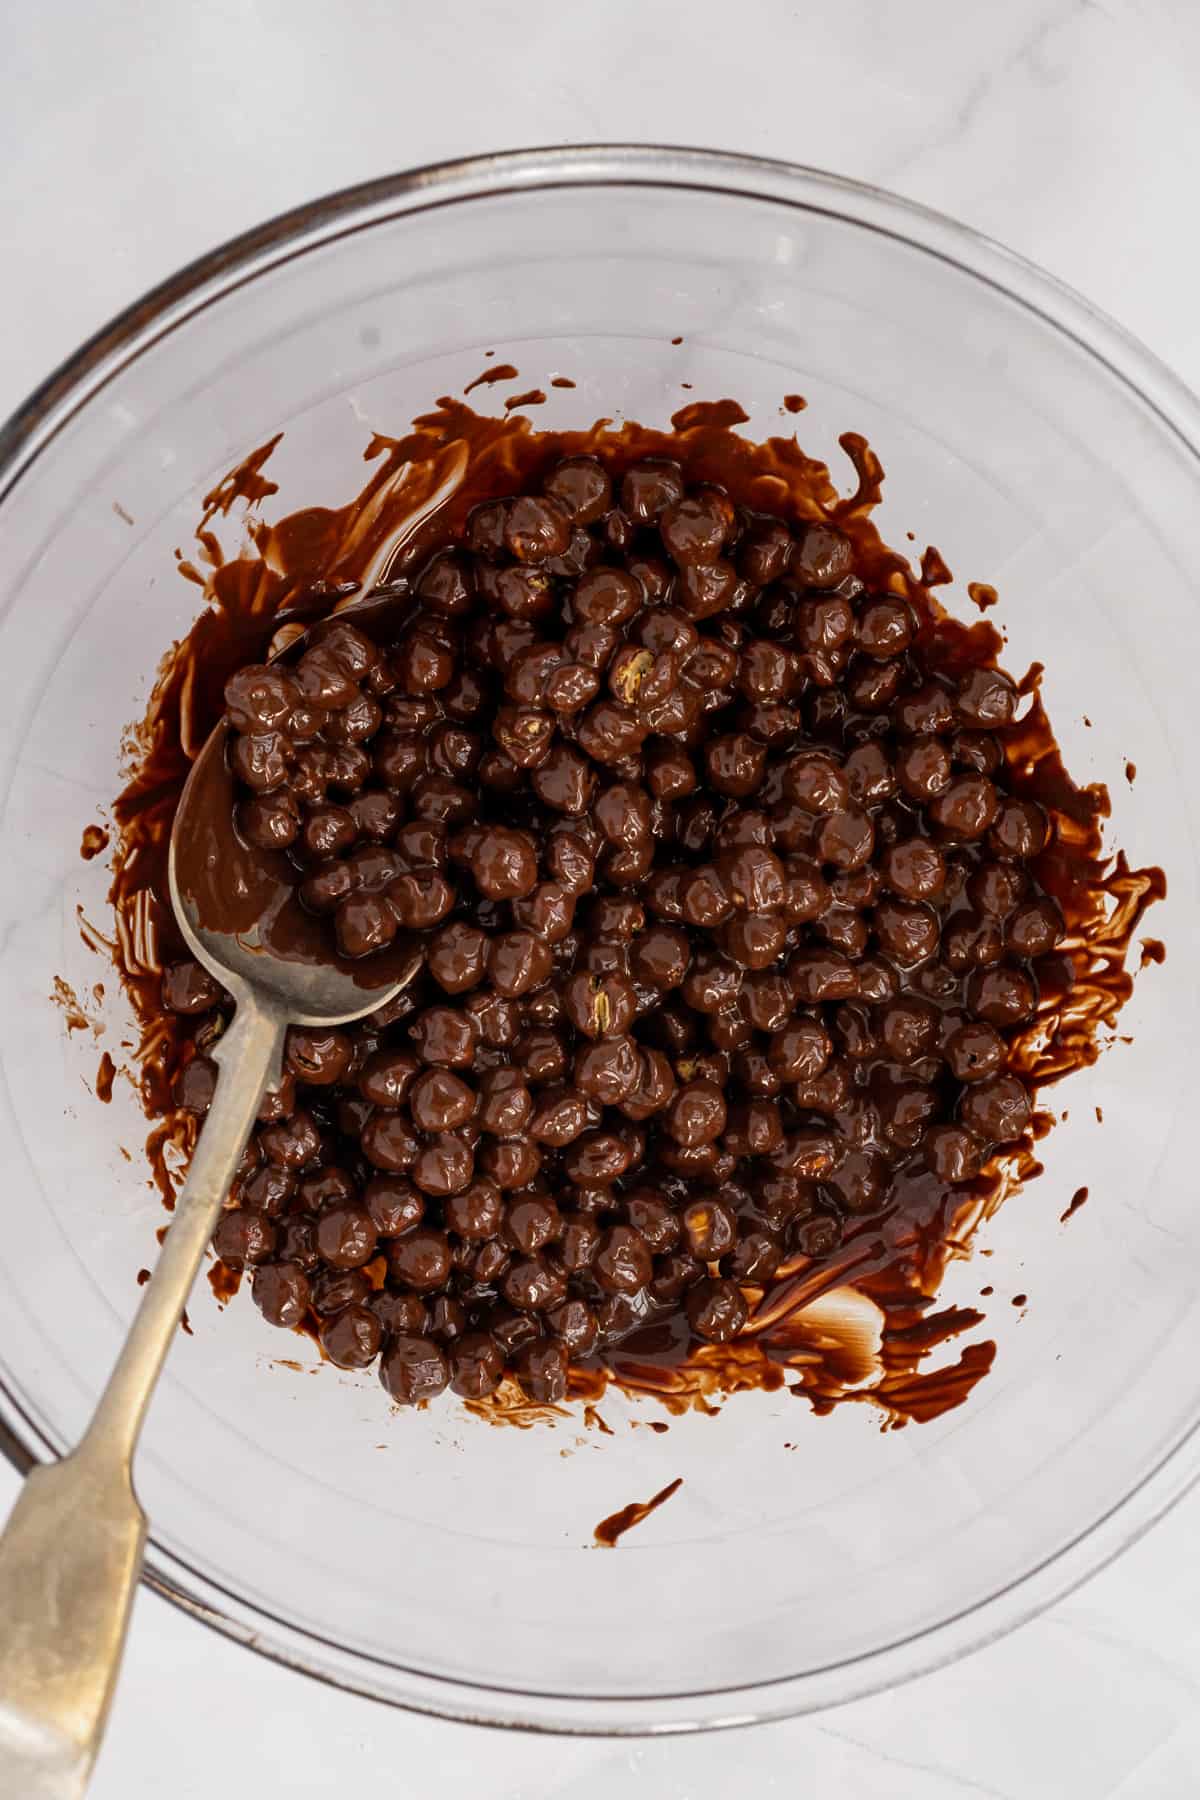 combined roasted chickpeas and melted chocolate in large bowl with large spoon.